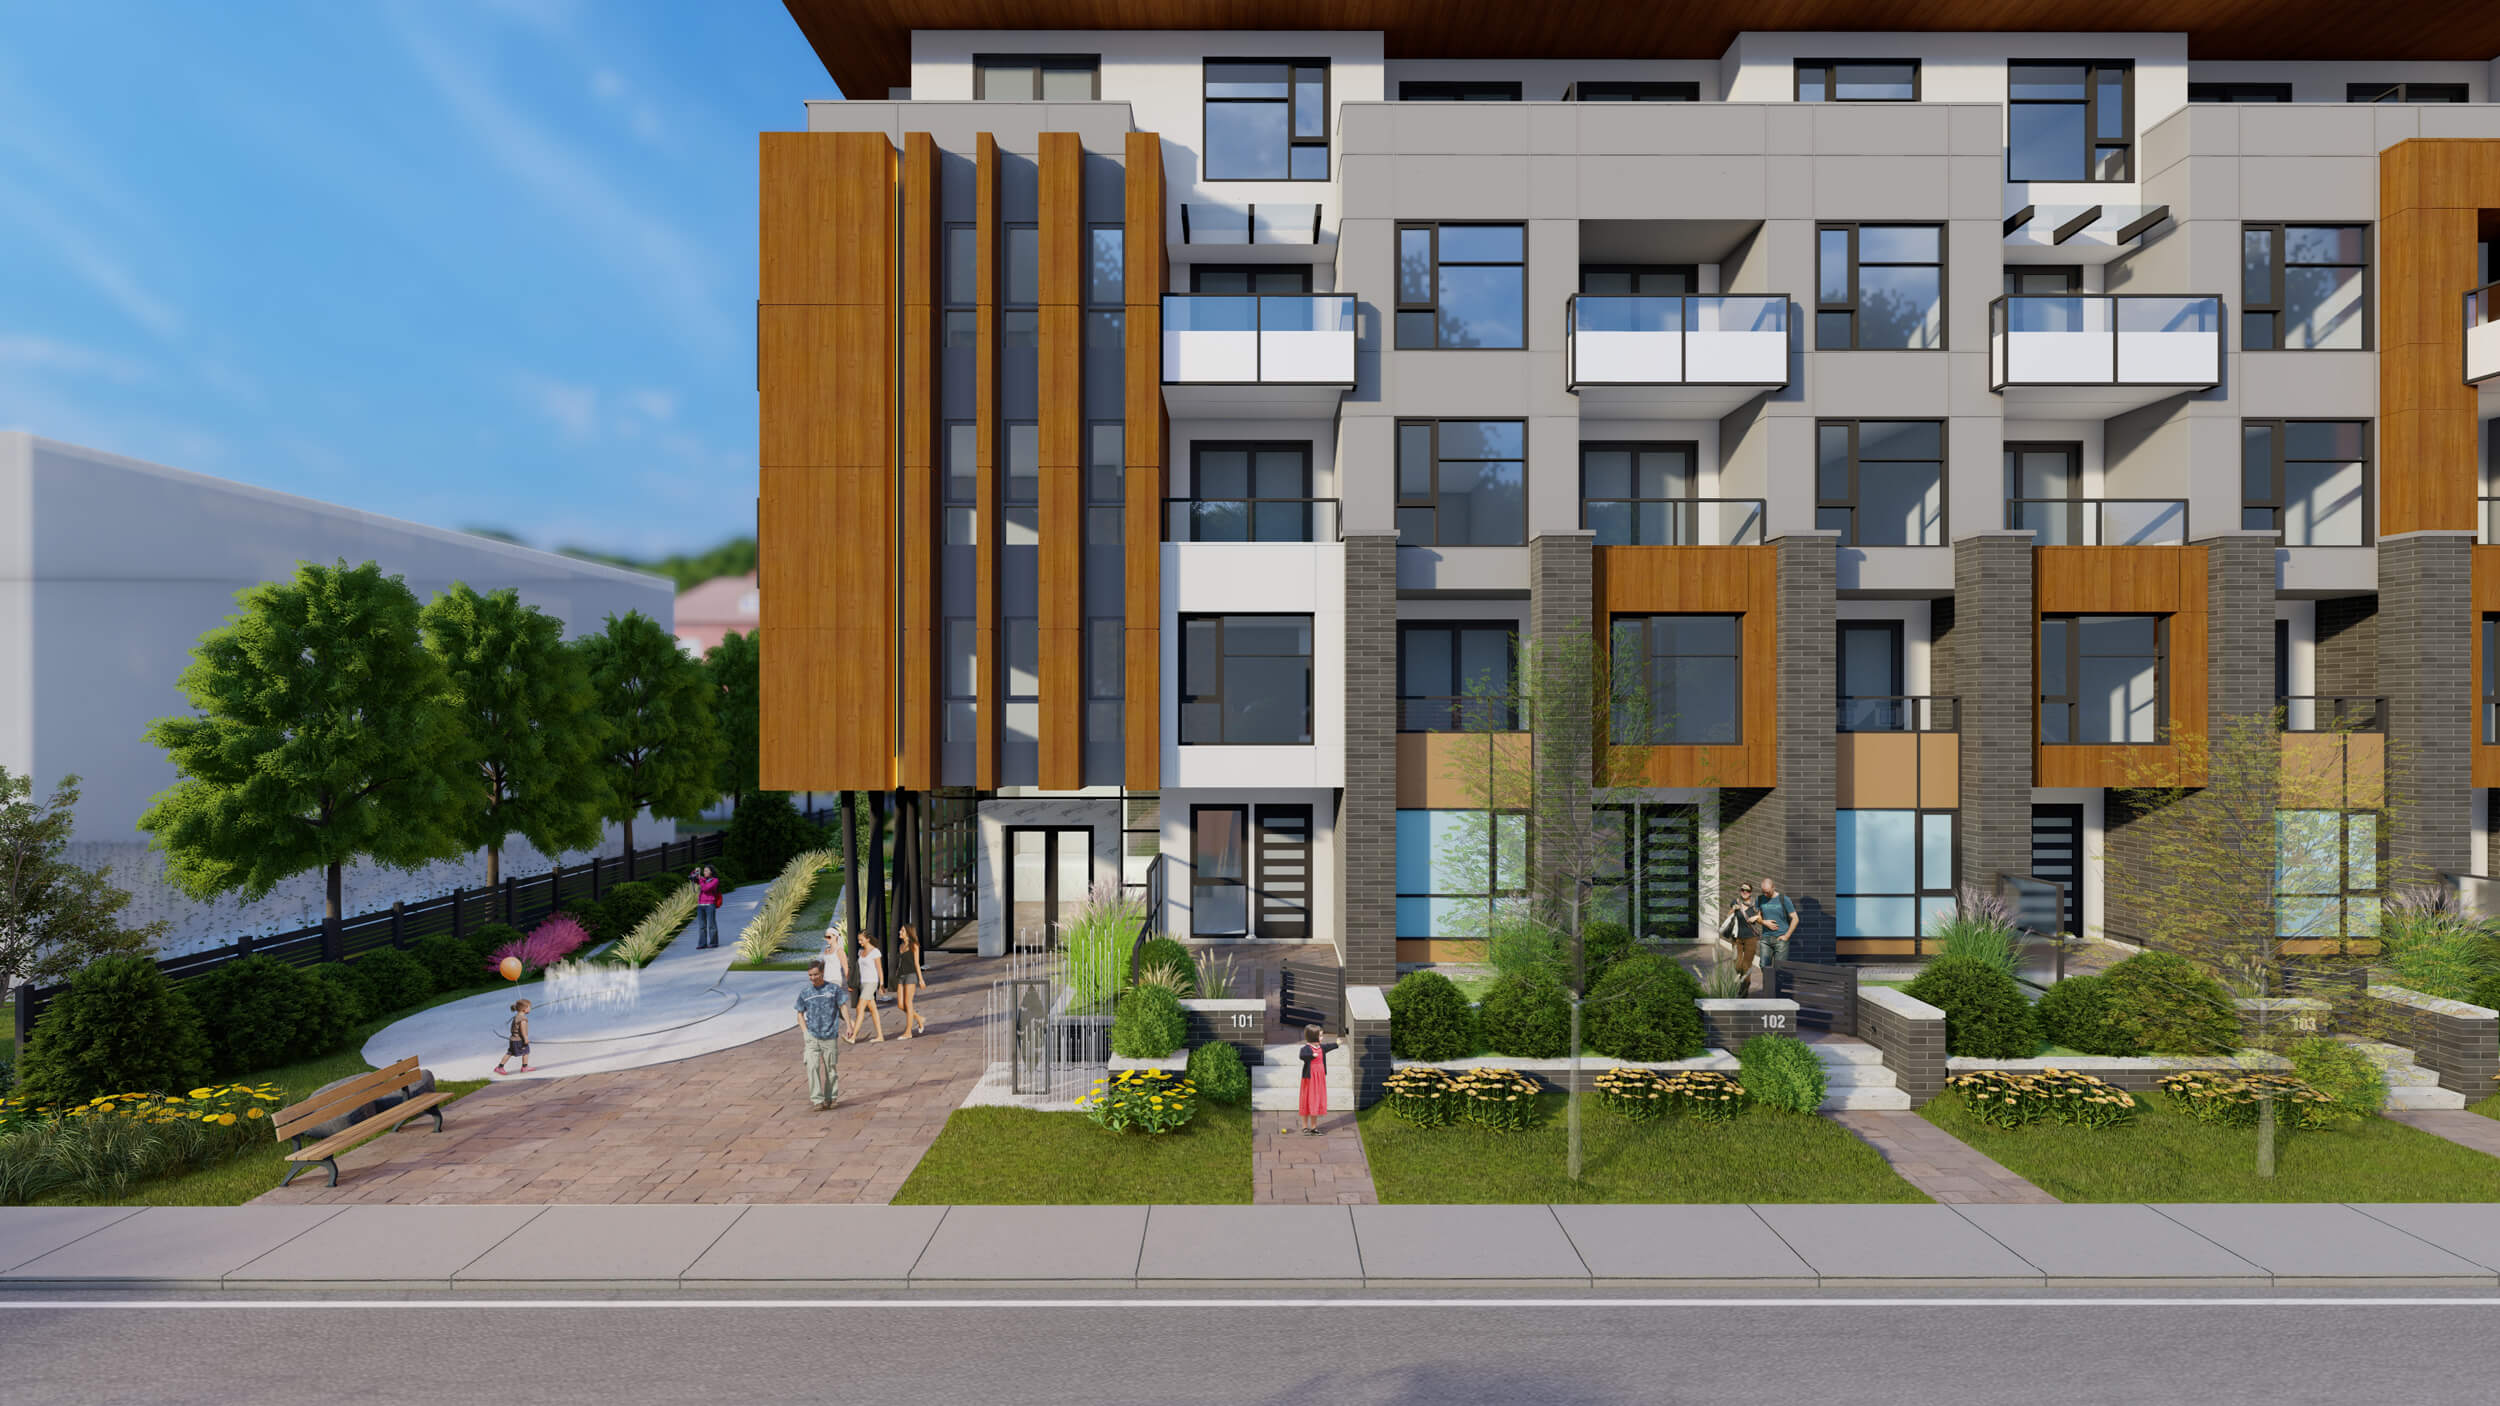 The “Halvo” development is a 5-storey residential condo project in Surrey. Design by Group 161 | DF Architecture.